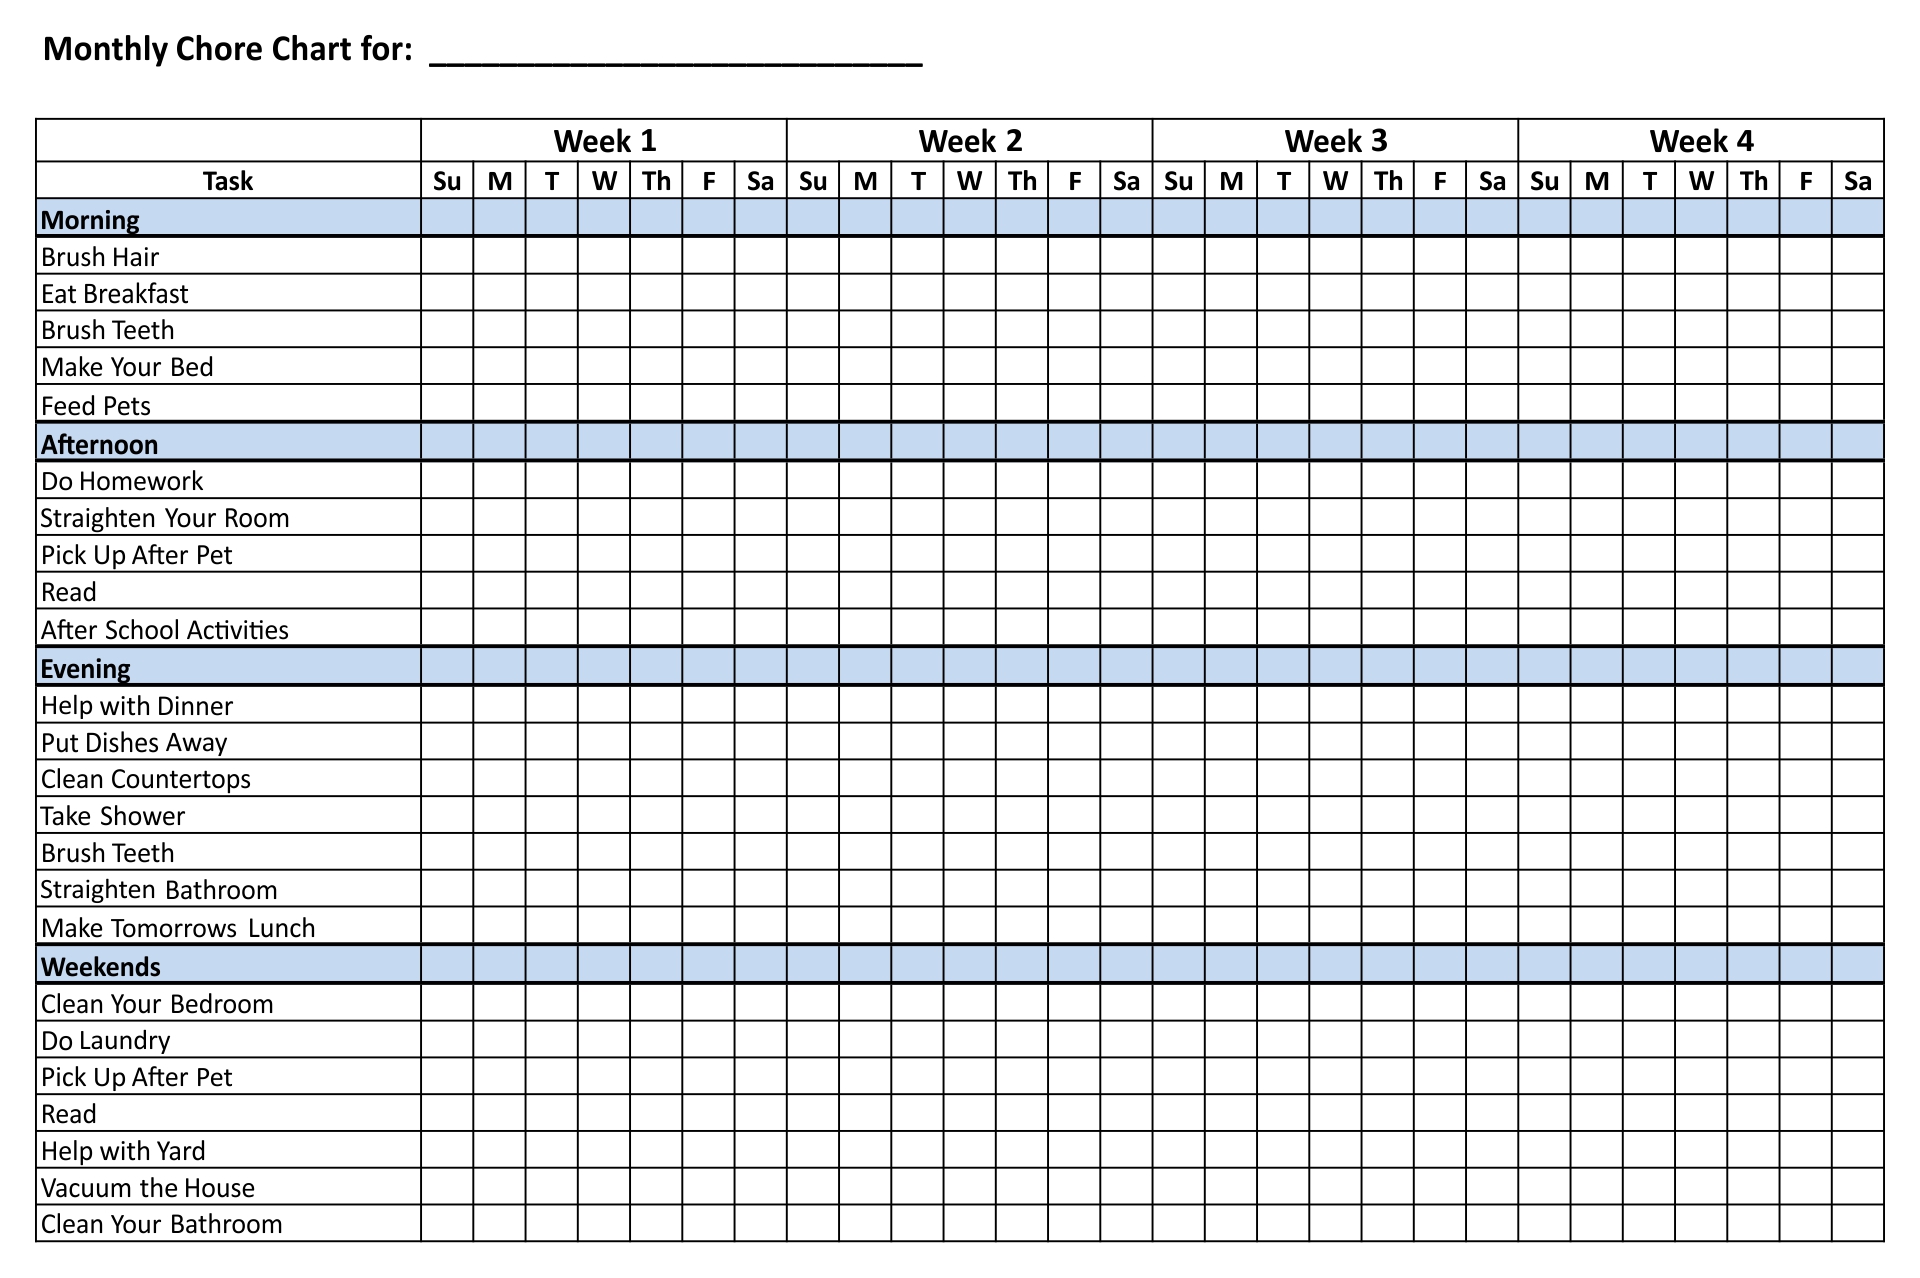 Free Printable Monthly Chore Chart Template - Printable Templates